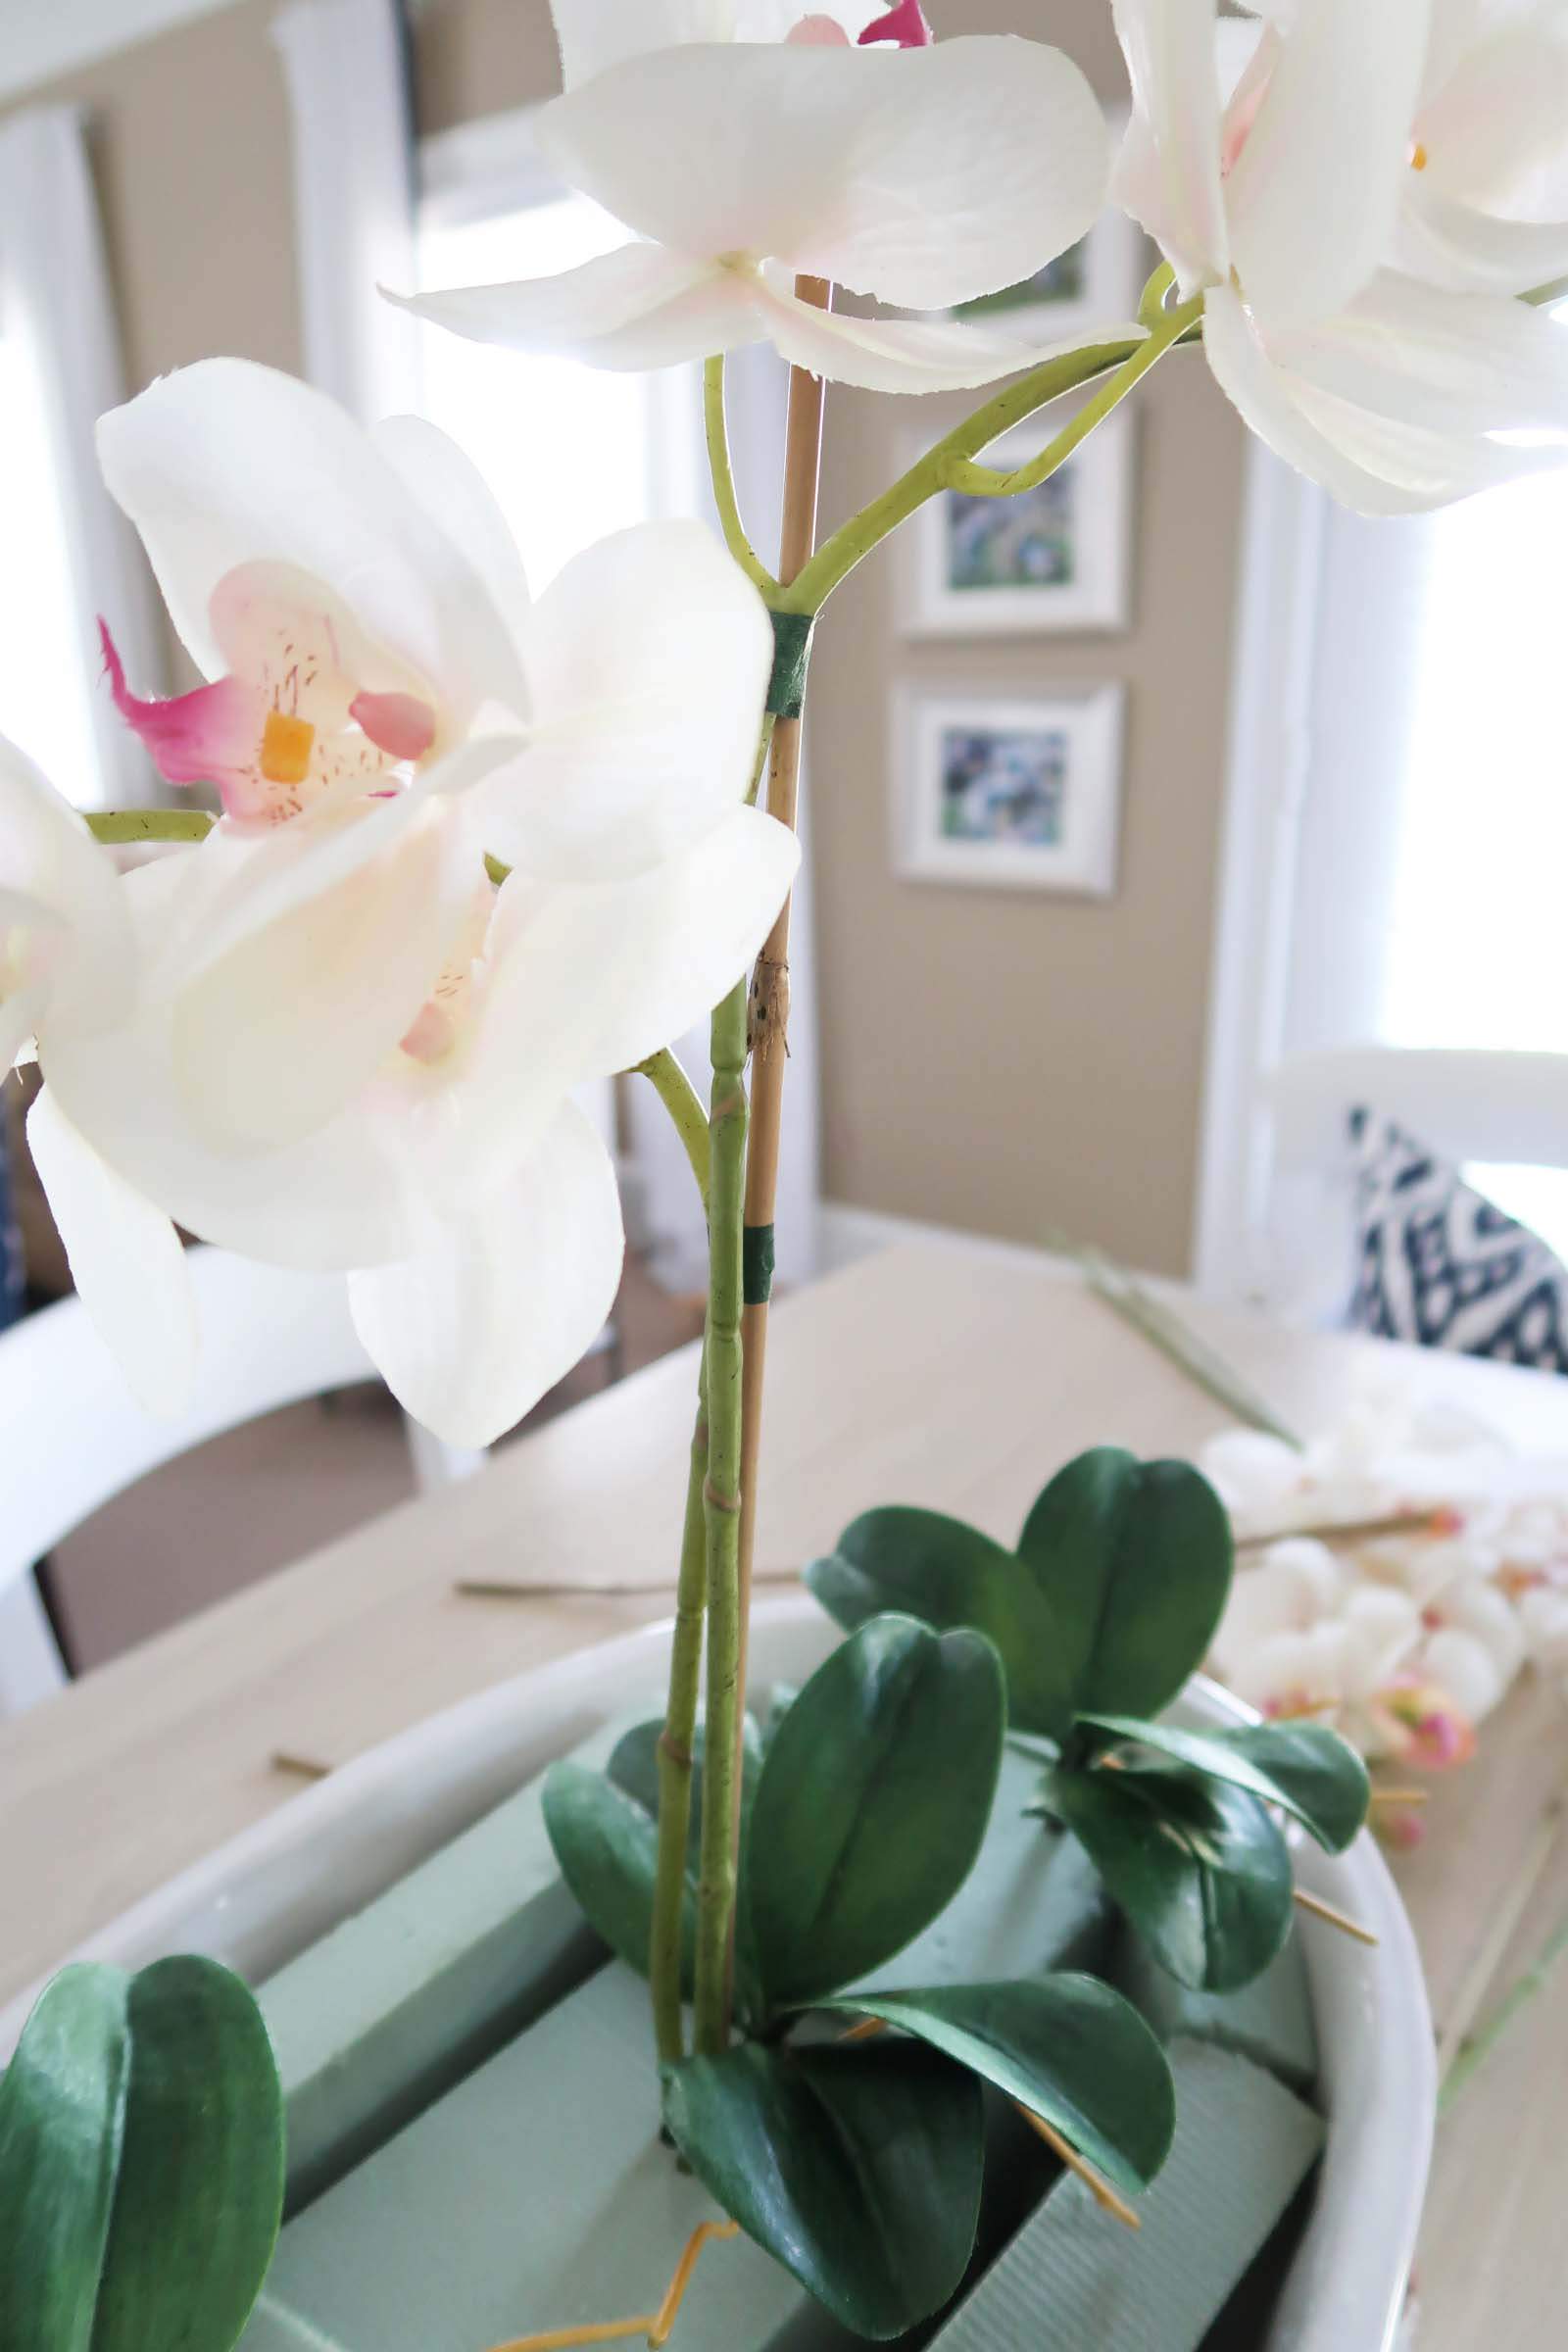 How to Make Fake Orchids - Blue, Orange and Even Green Ones